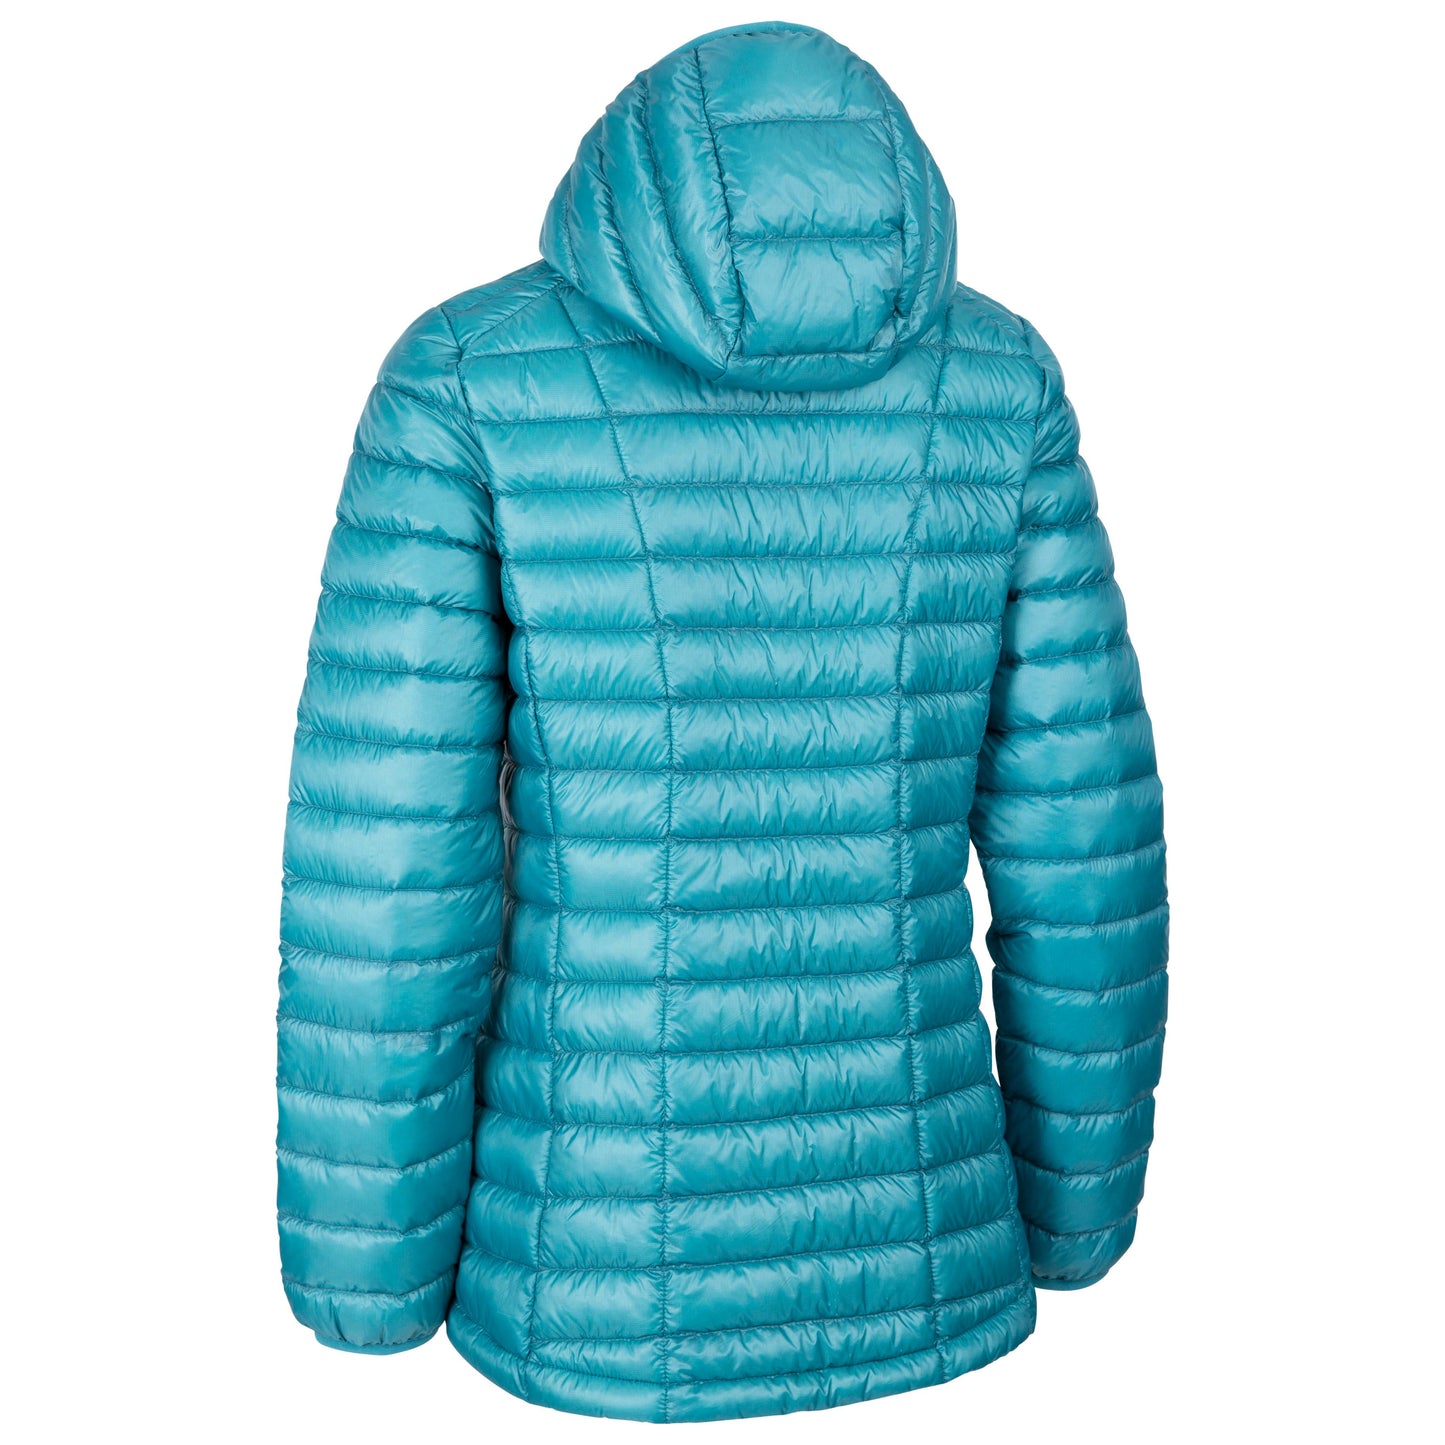 Galina Women's Down Padded DLX Jacket in Storm Blue